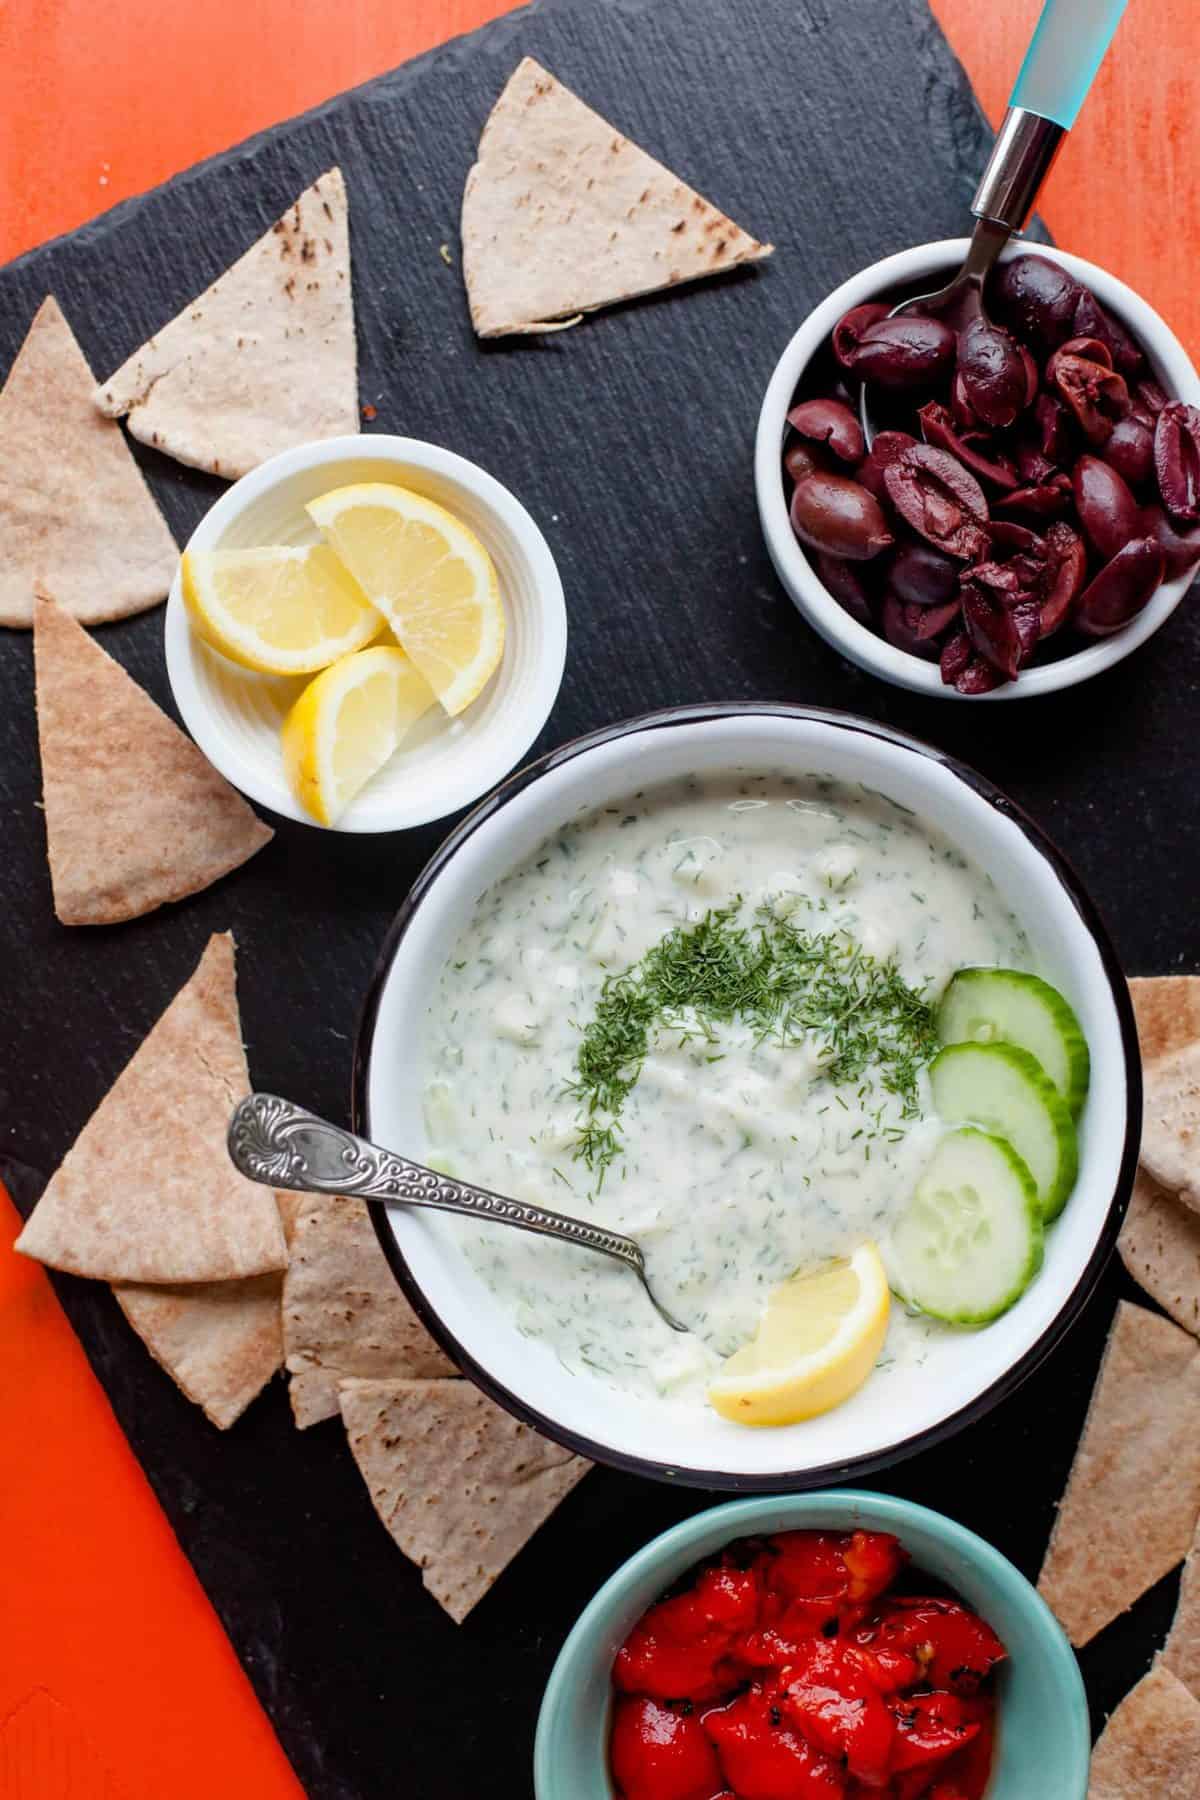 Tzatziki Sauce sits on a black background with crackers, and bowls of lemons, olives, and tomatoes nearby.